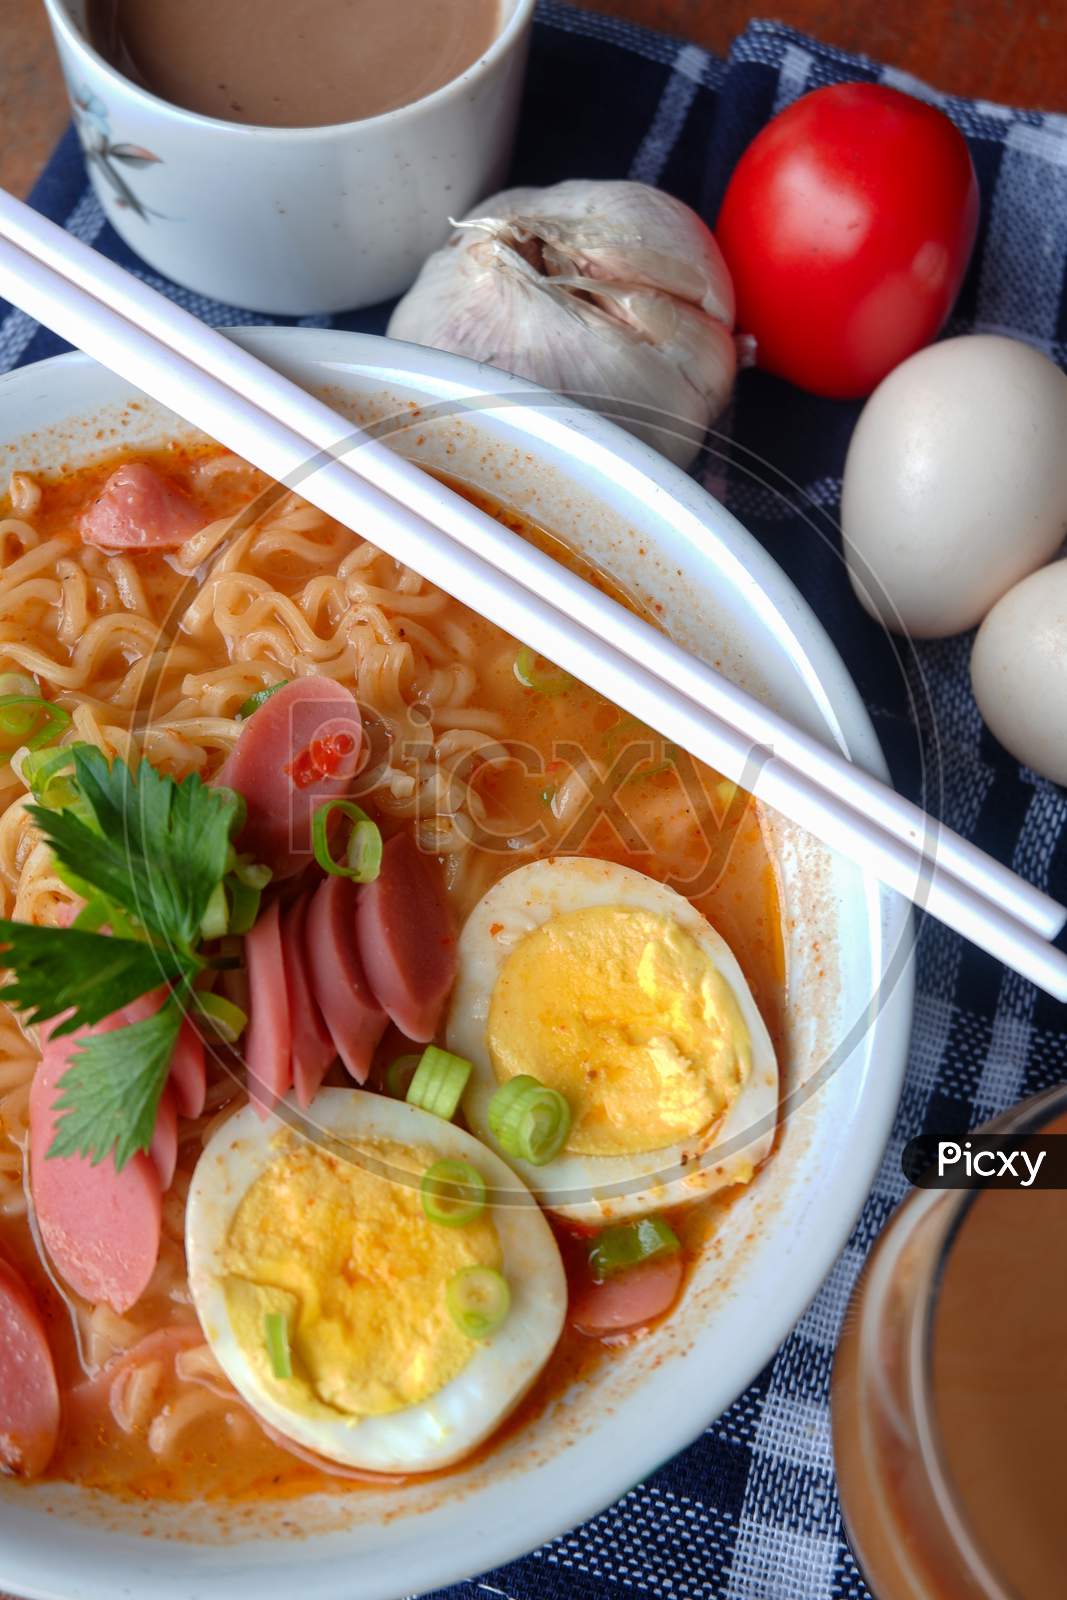 Photo Of Noodle Soup With Toppings Such As Sausages, Eggs, And Vegetables